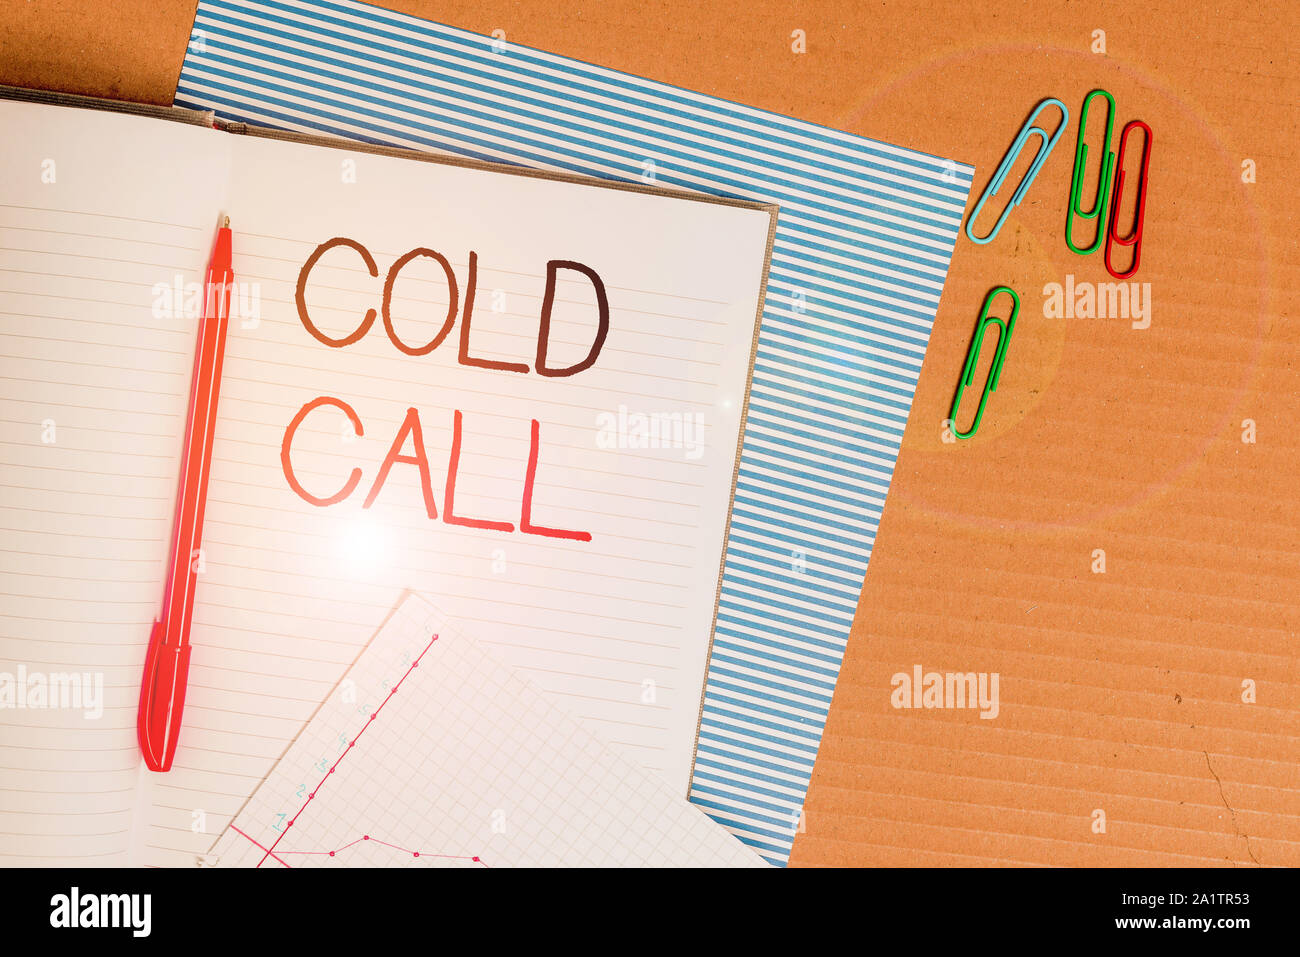 Writing note showing Cold Call. Business concept for Unsolicited call made by someone trying to sell goods or services Striped paperboard notebook car Stock Photo